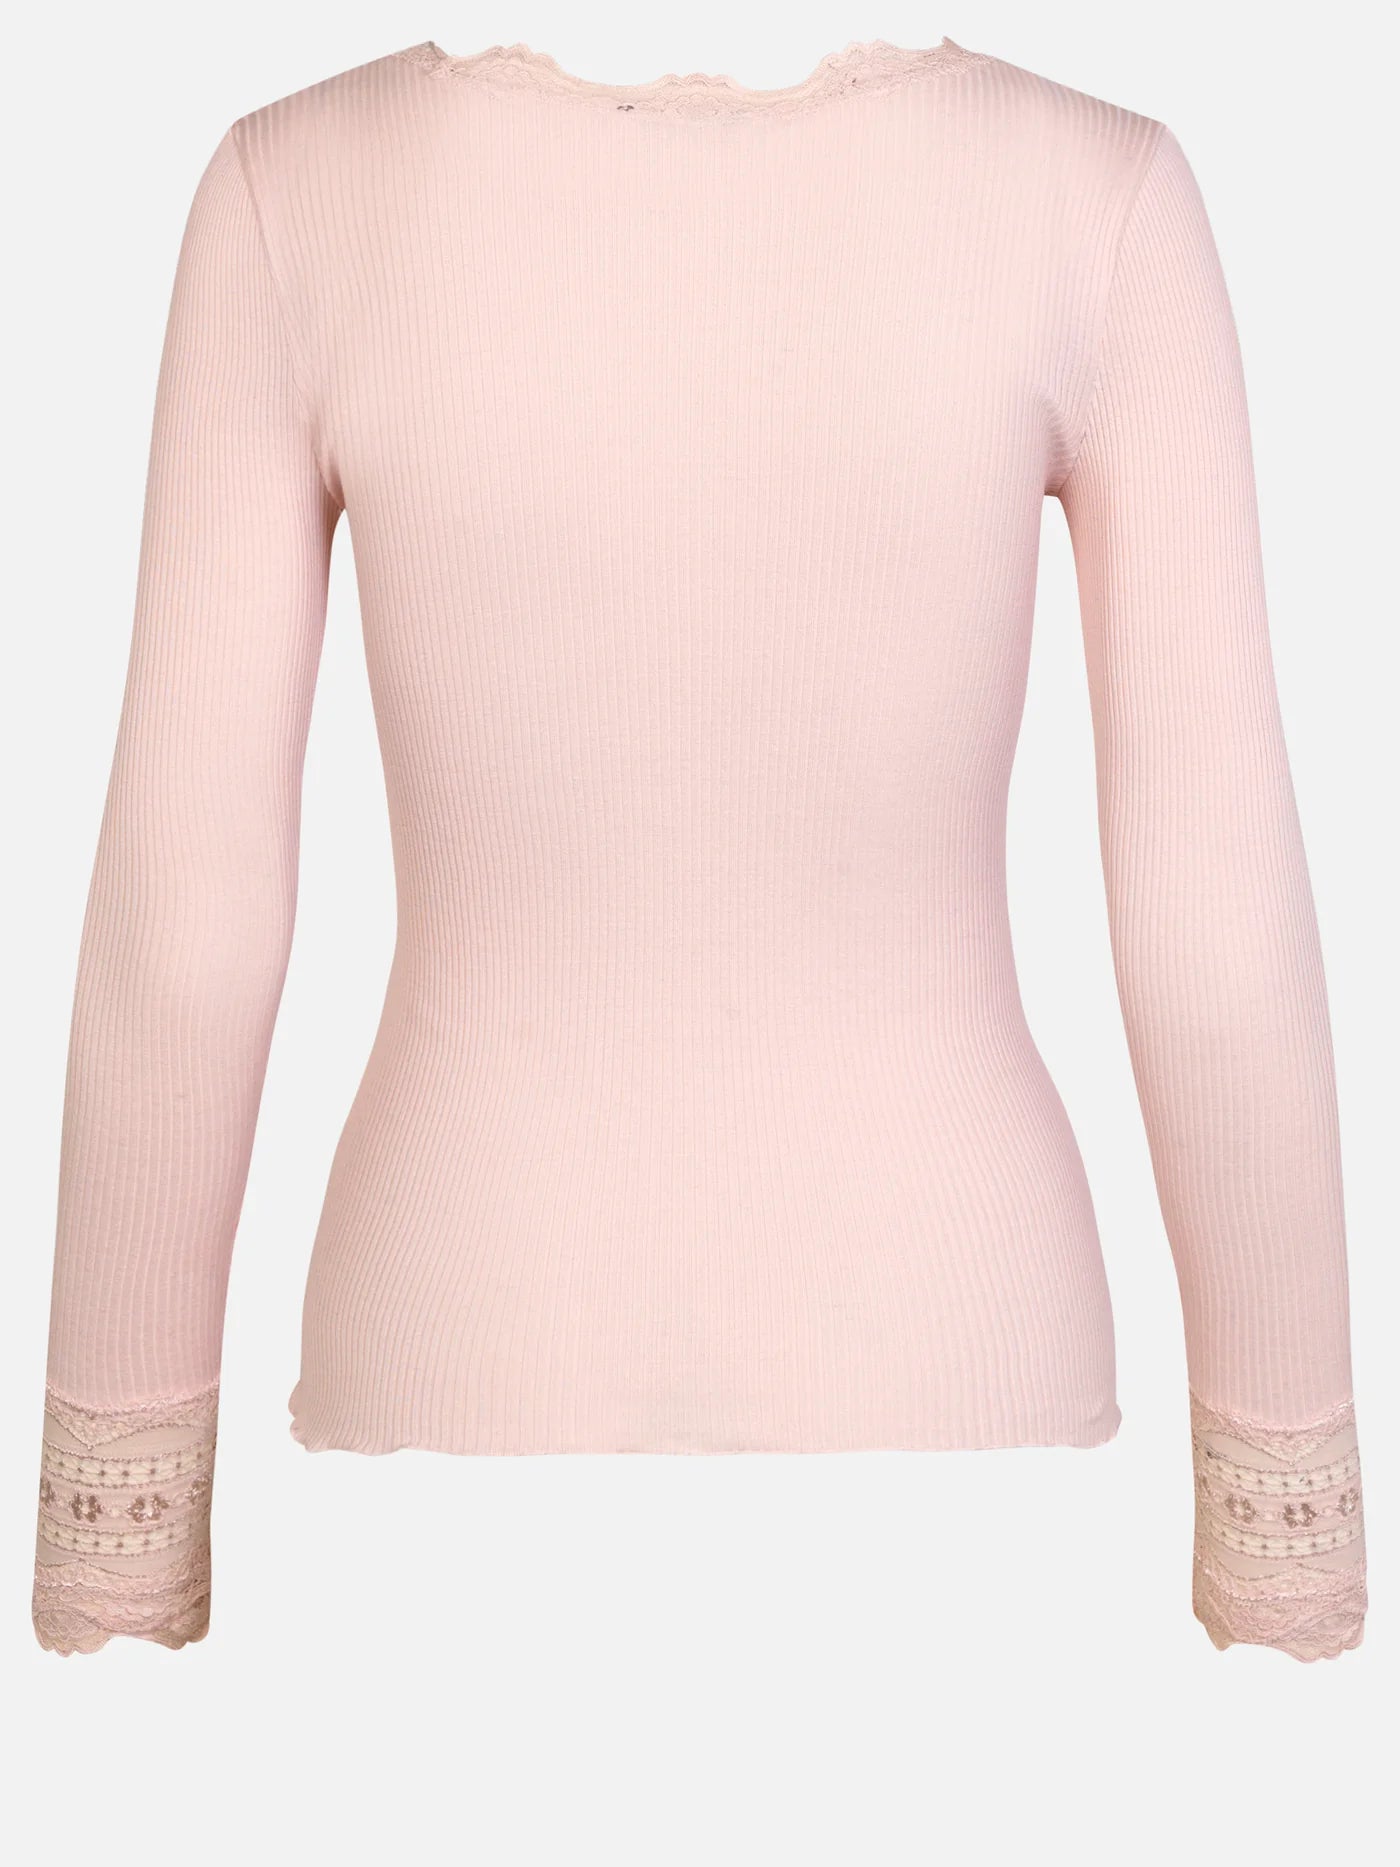 A Rosemunde Long-Sleeve Silk Lace Top, beautifully designed in a delicate pink color.